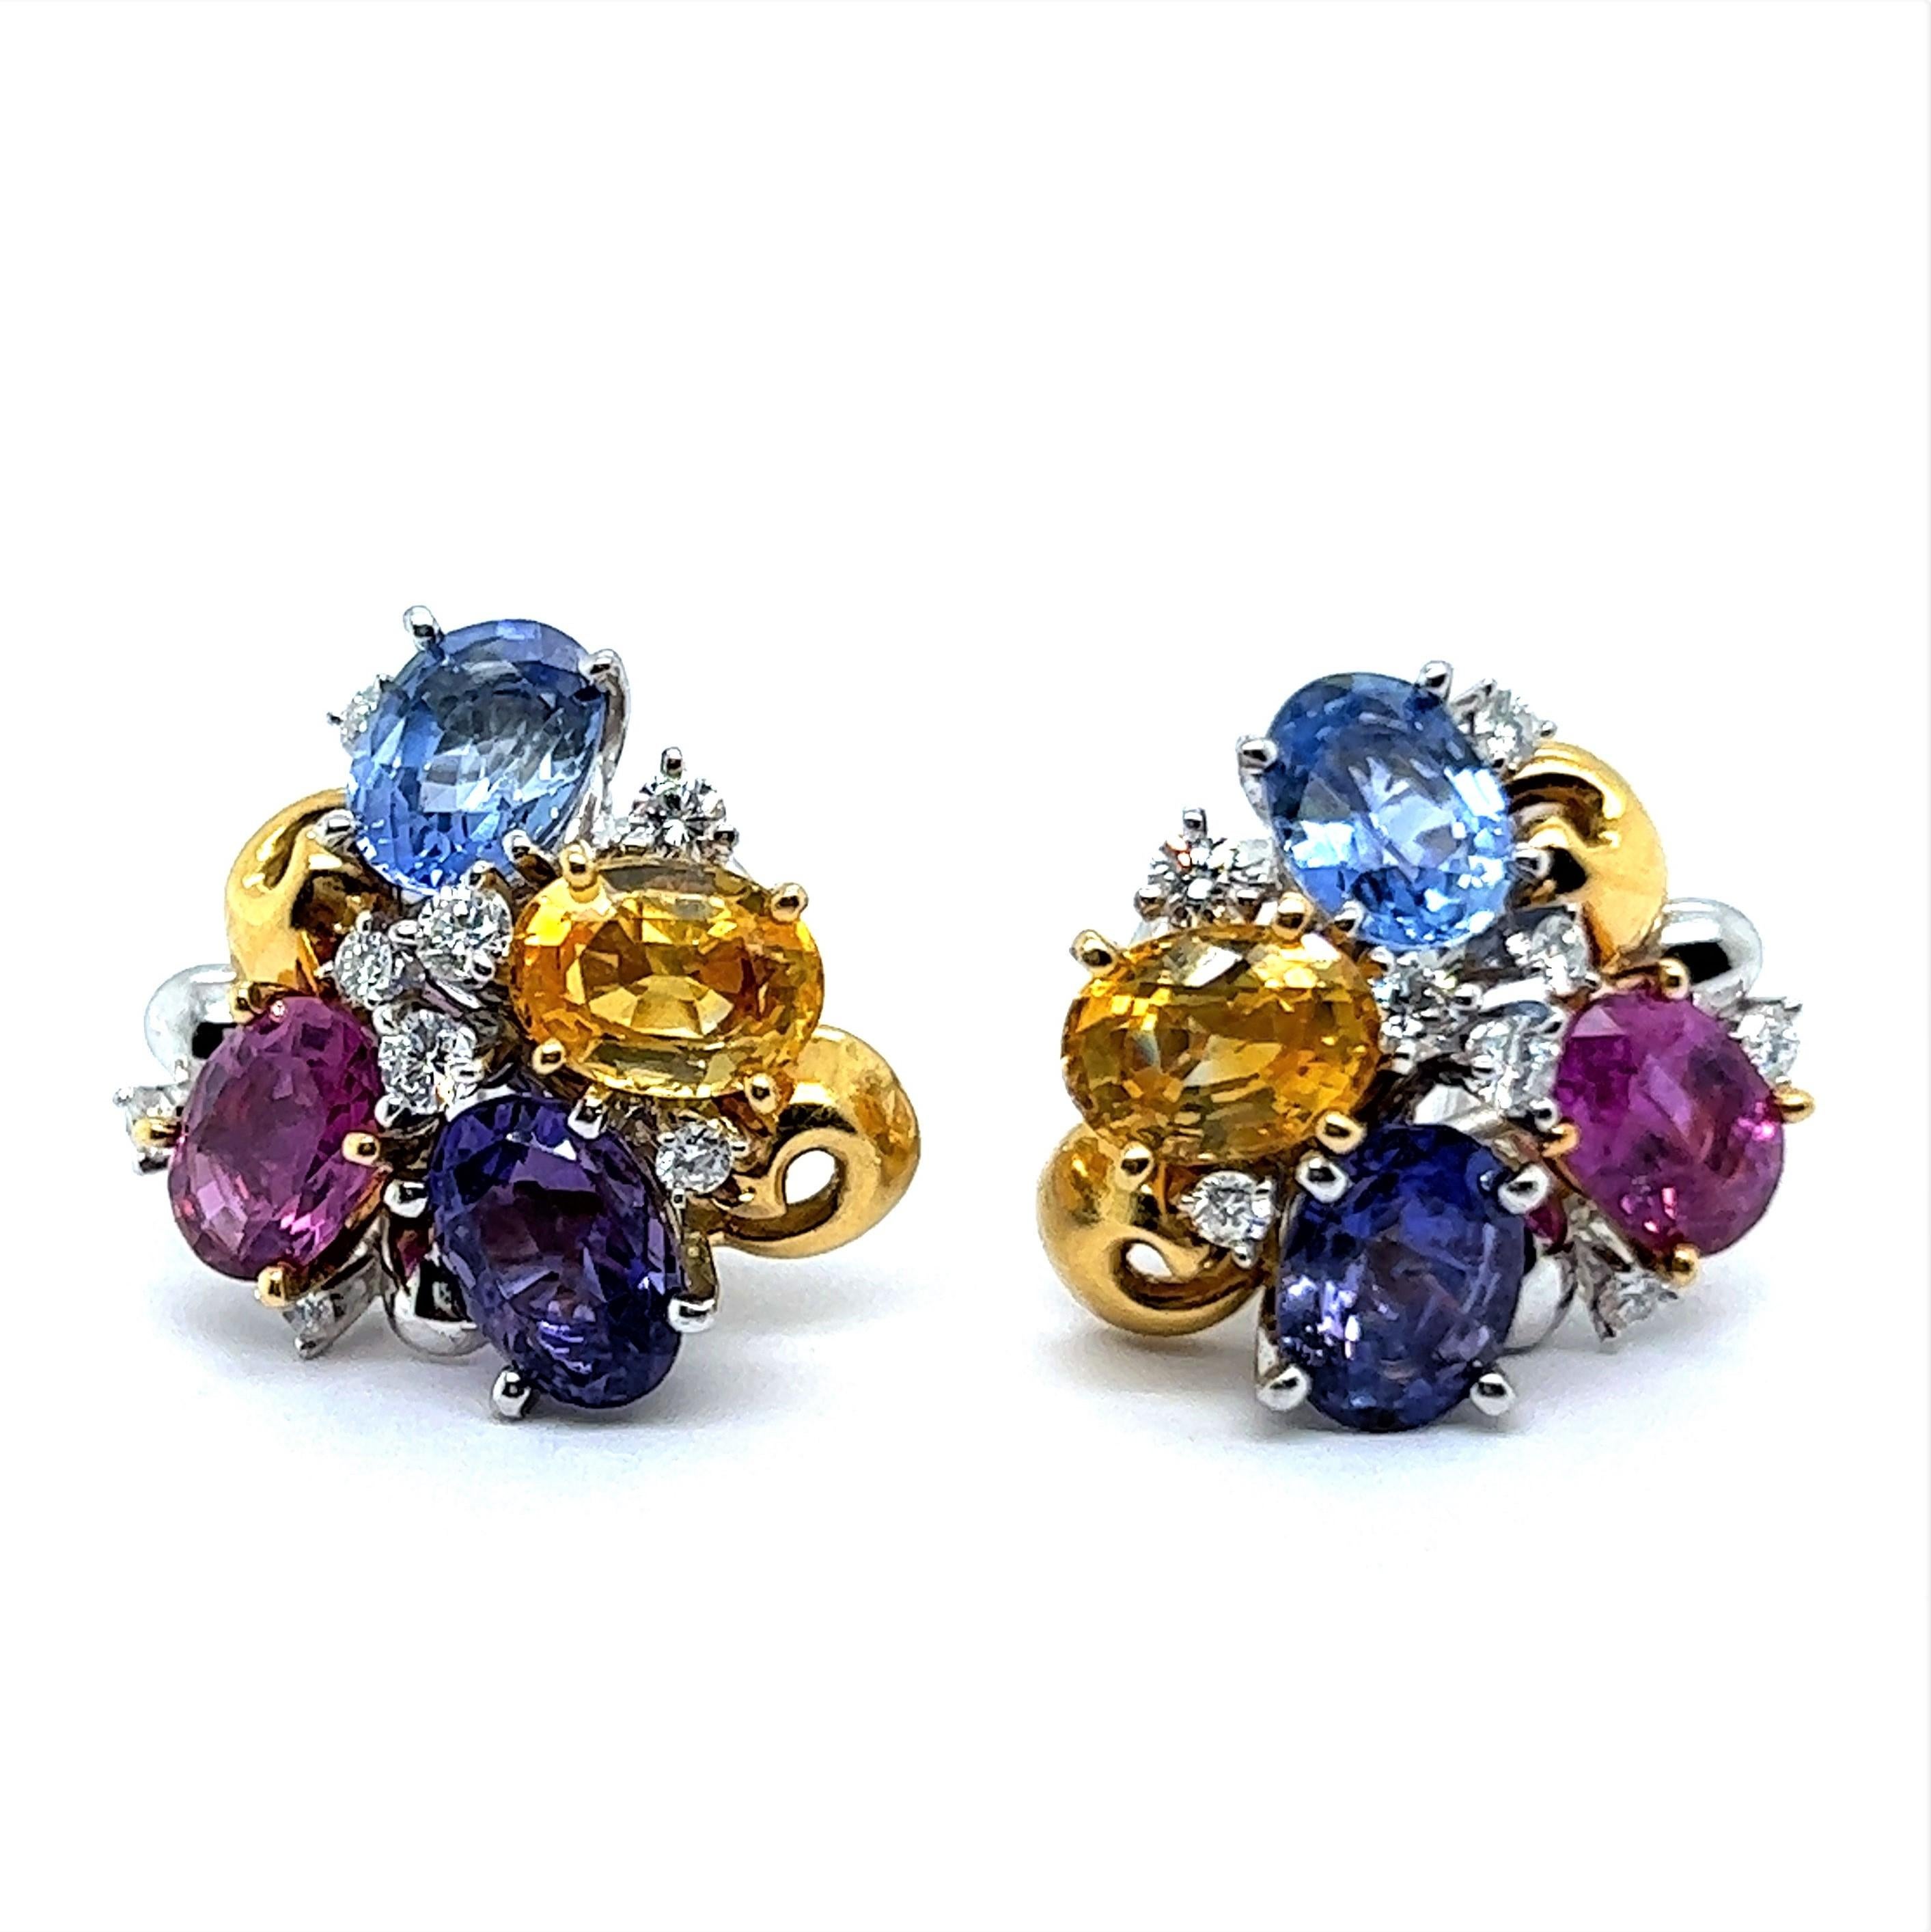 Oval Cut Playful Multi-Colored Sapphire Earrings in 18 Karat White and Yellow Gold For Sale